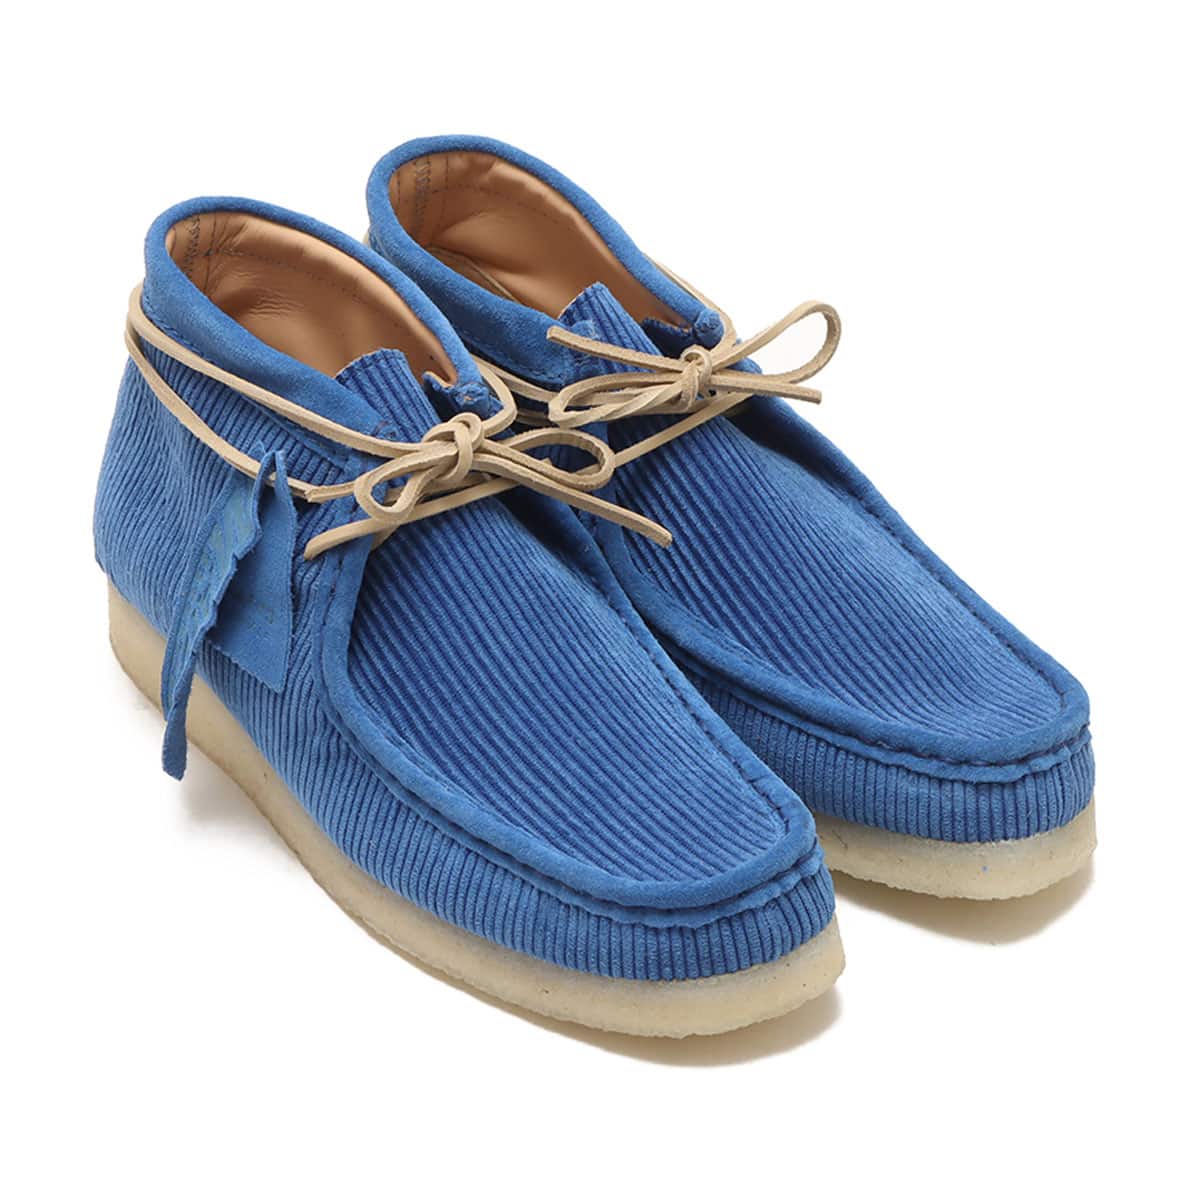 Clarks Wallabee Boot Pacific Blue